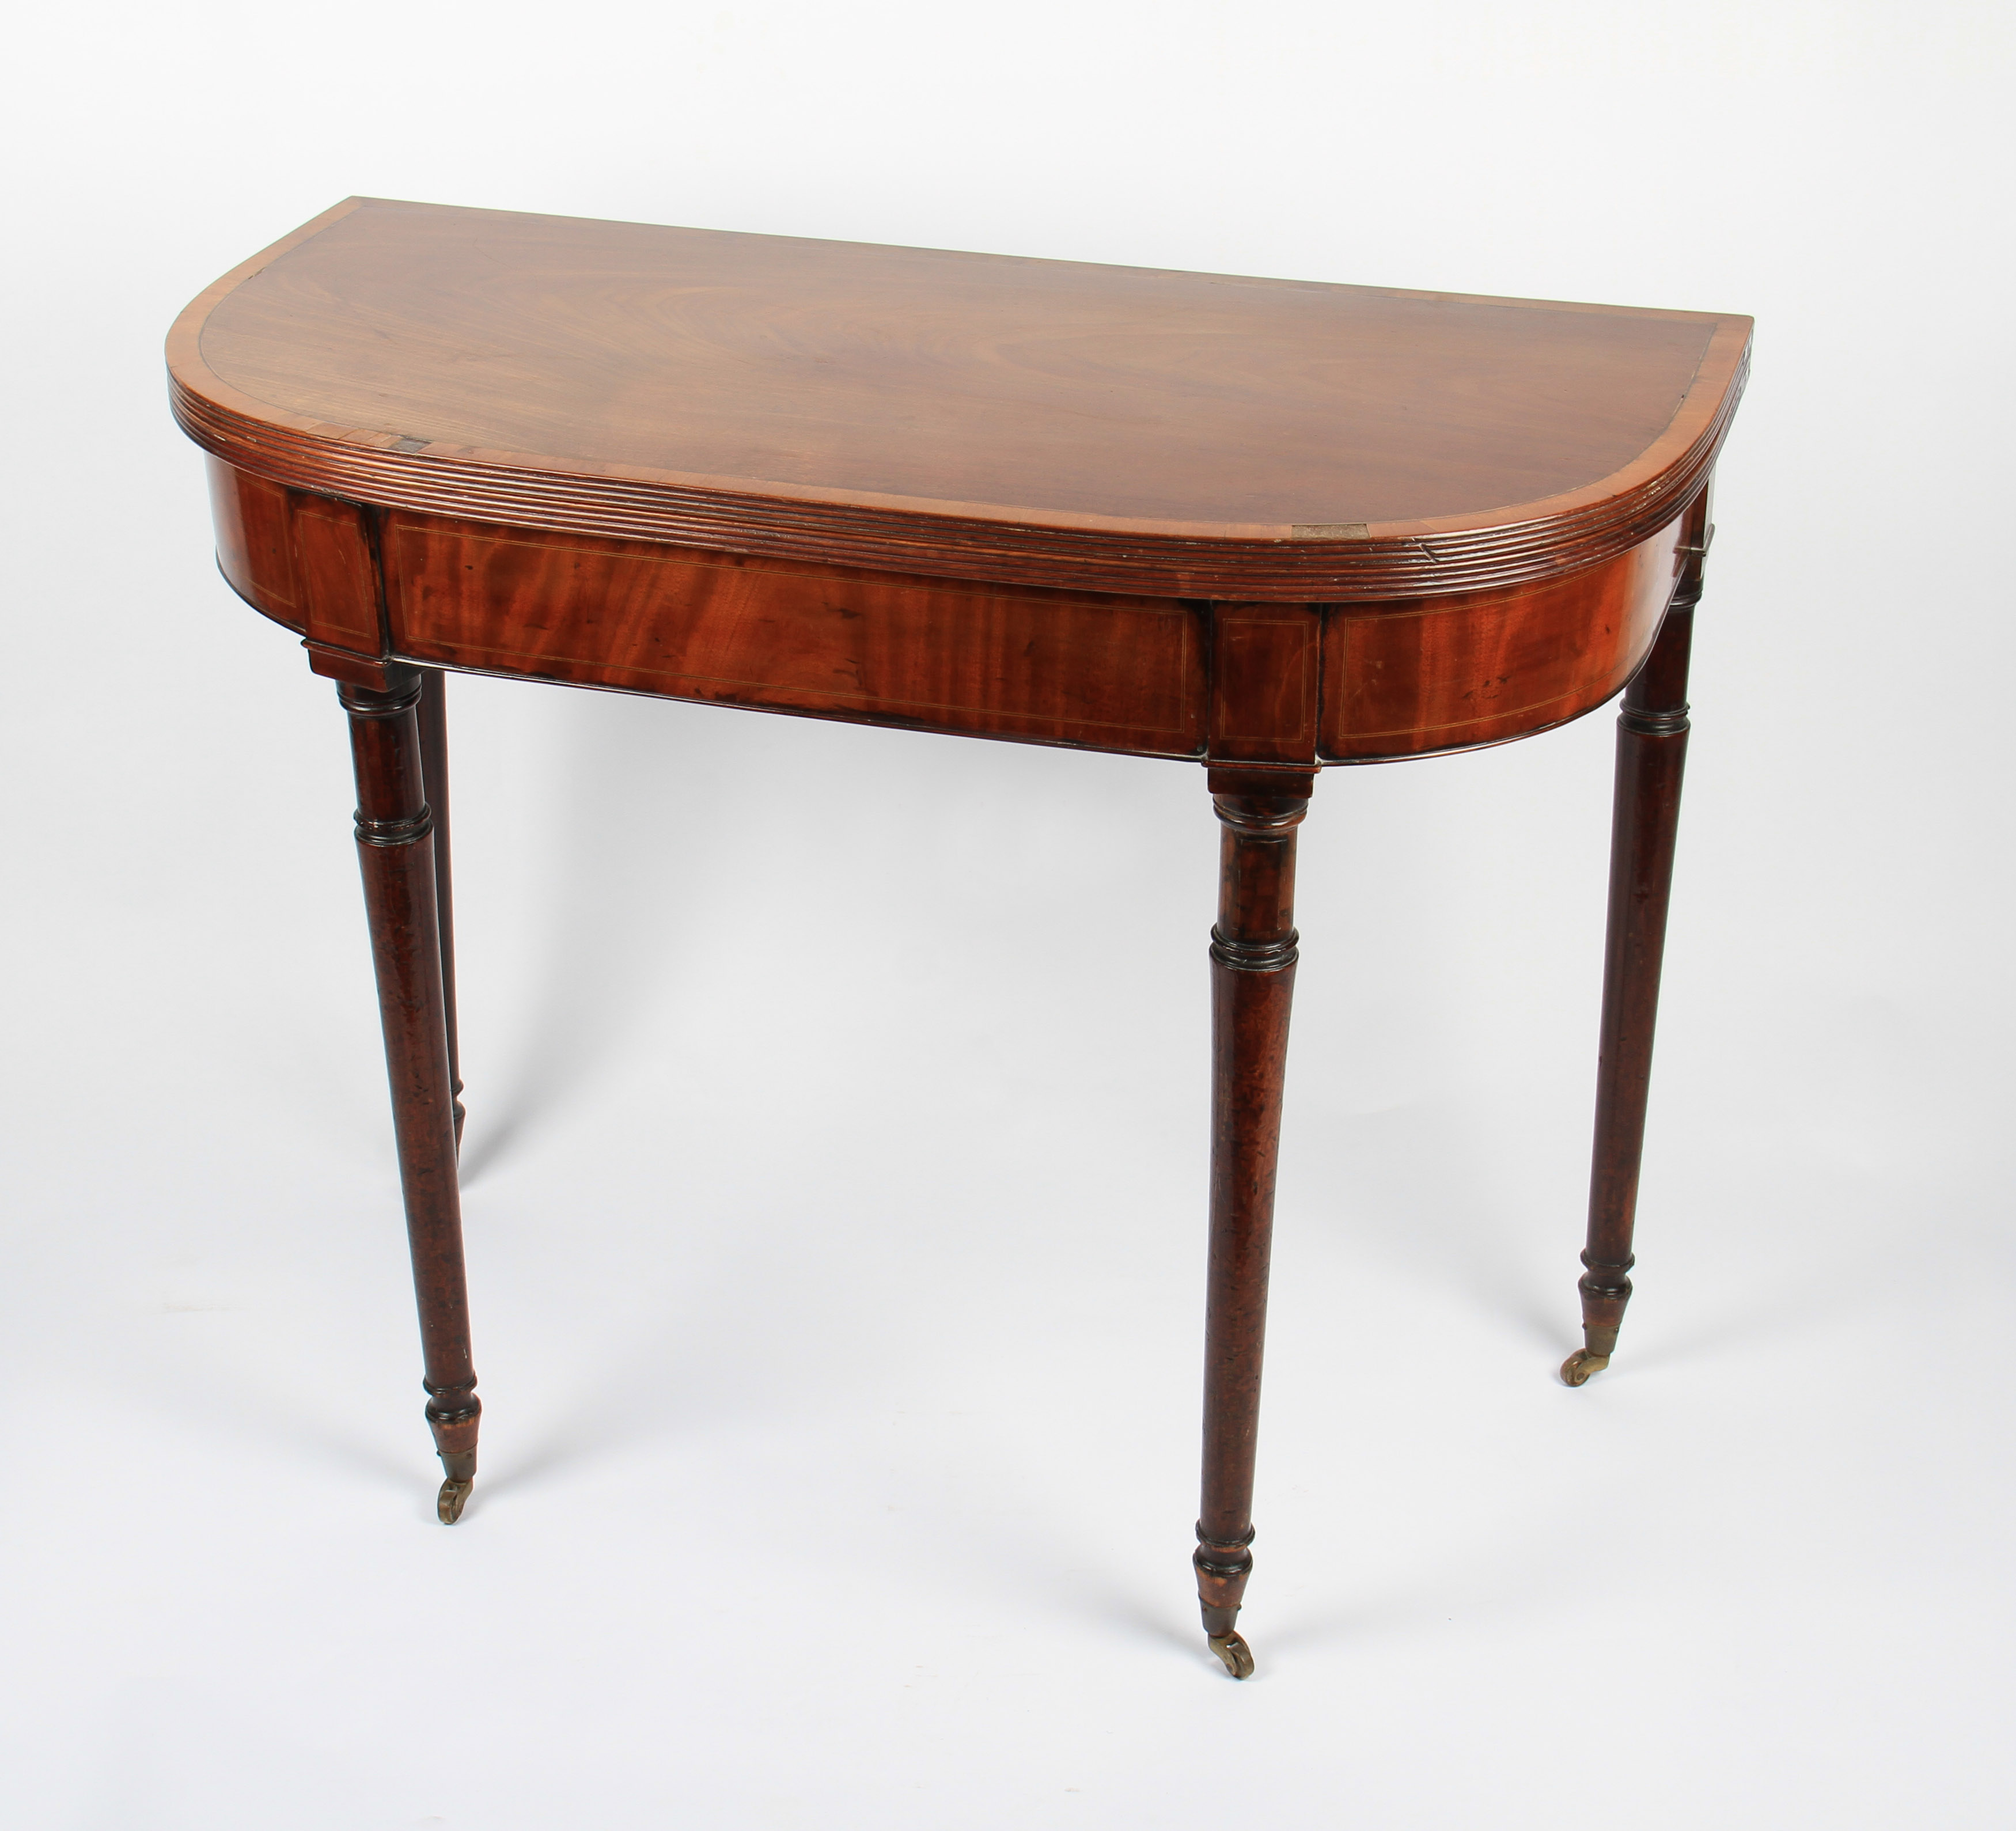 A 19th Century mahogany veneered D end shaped fold over table on turned supports.